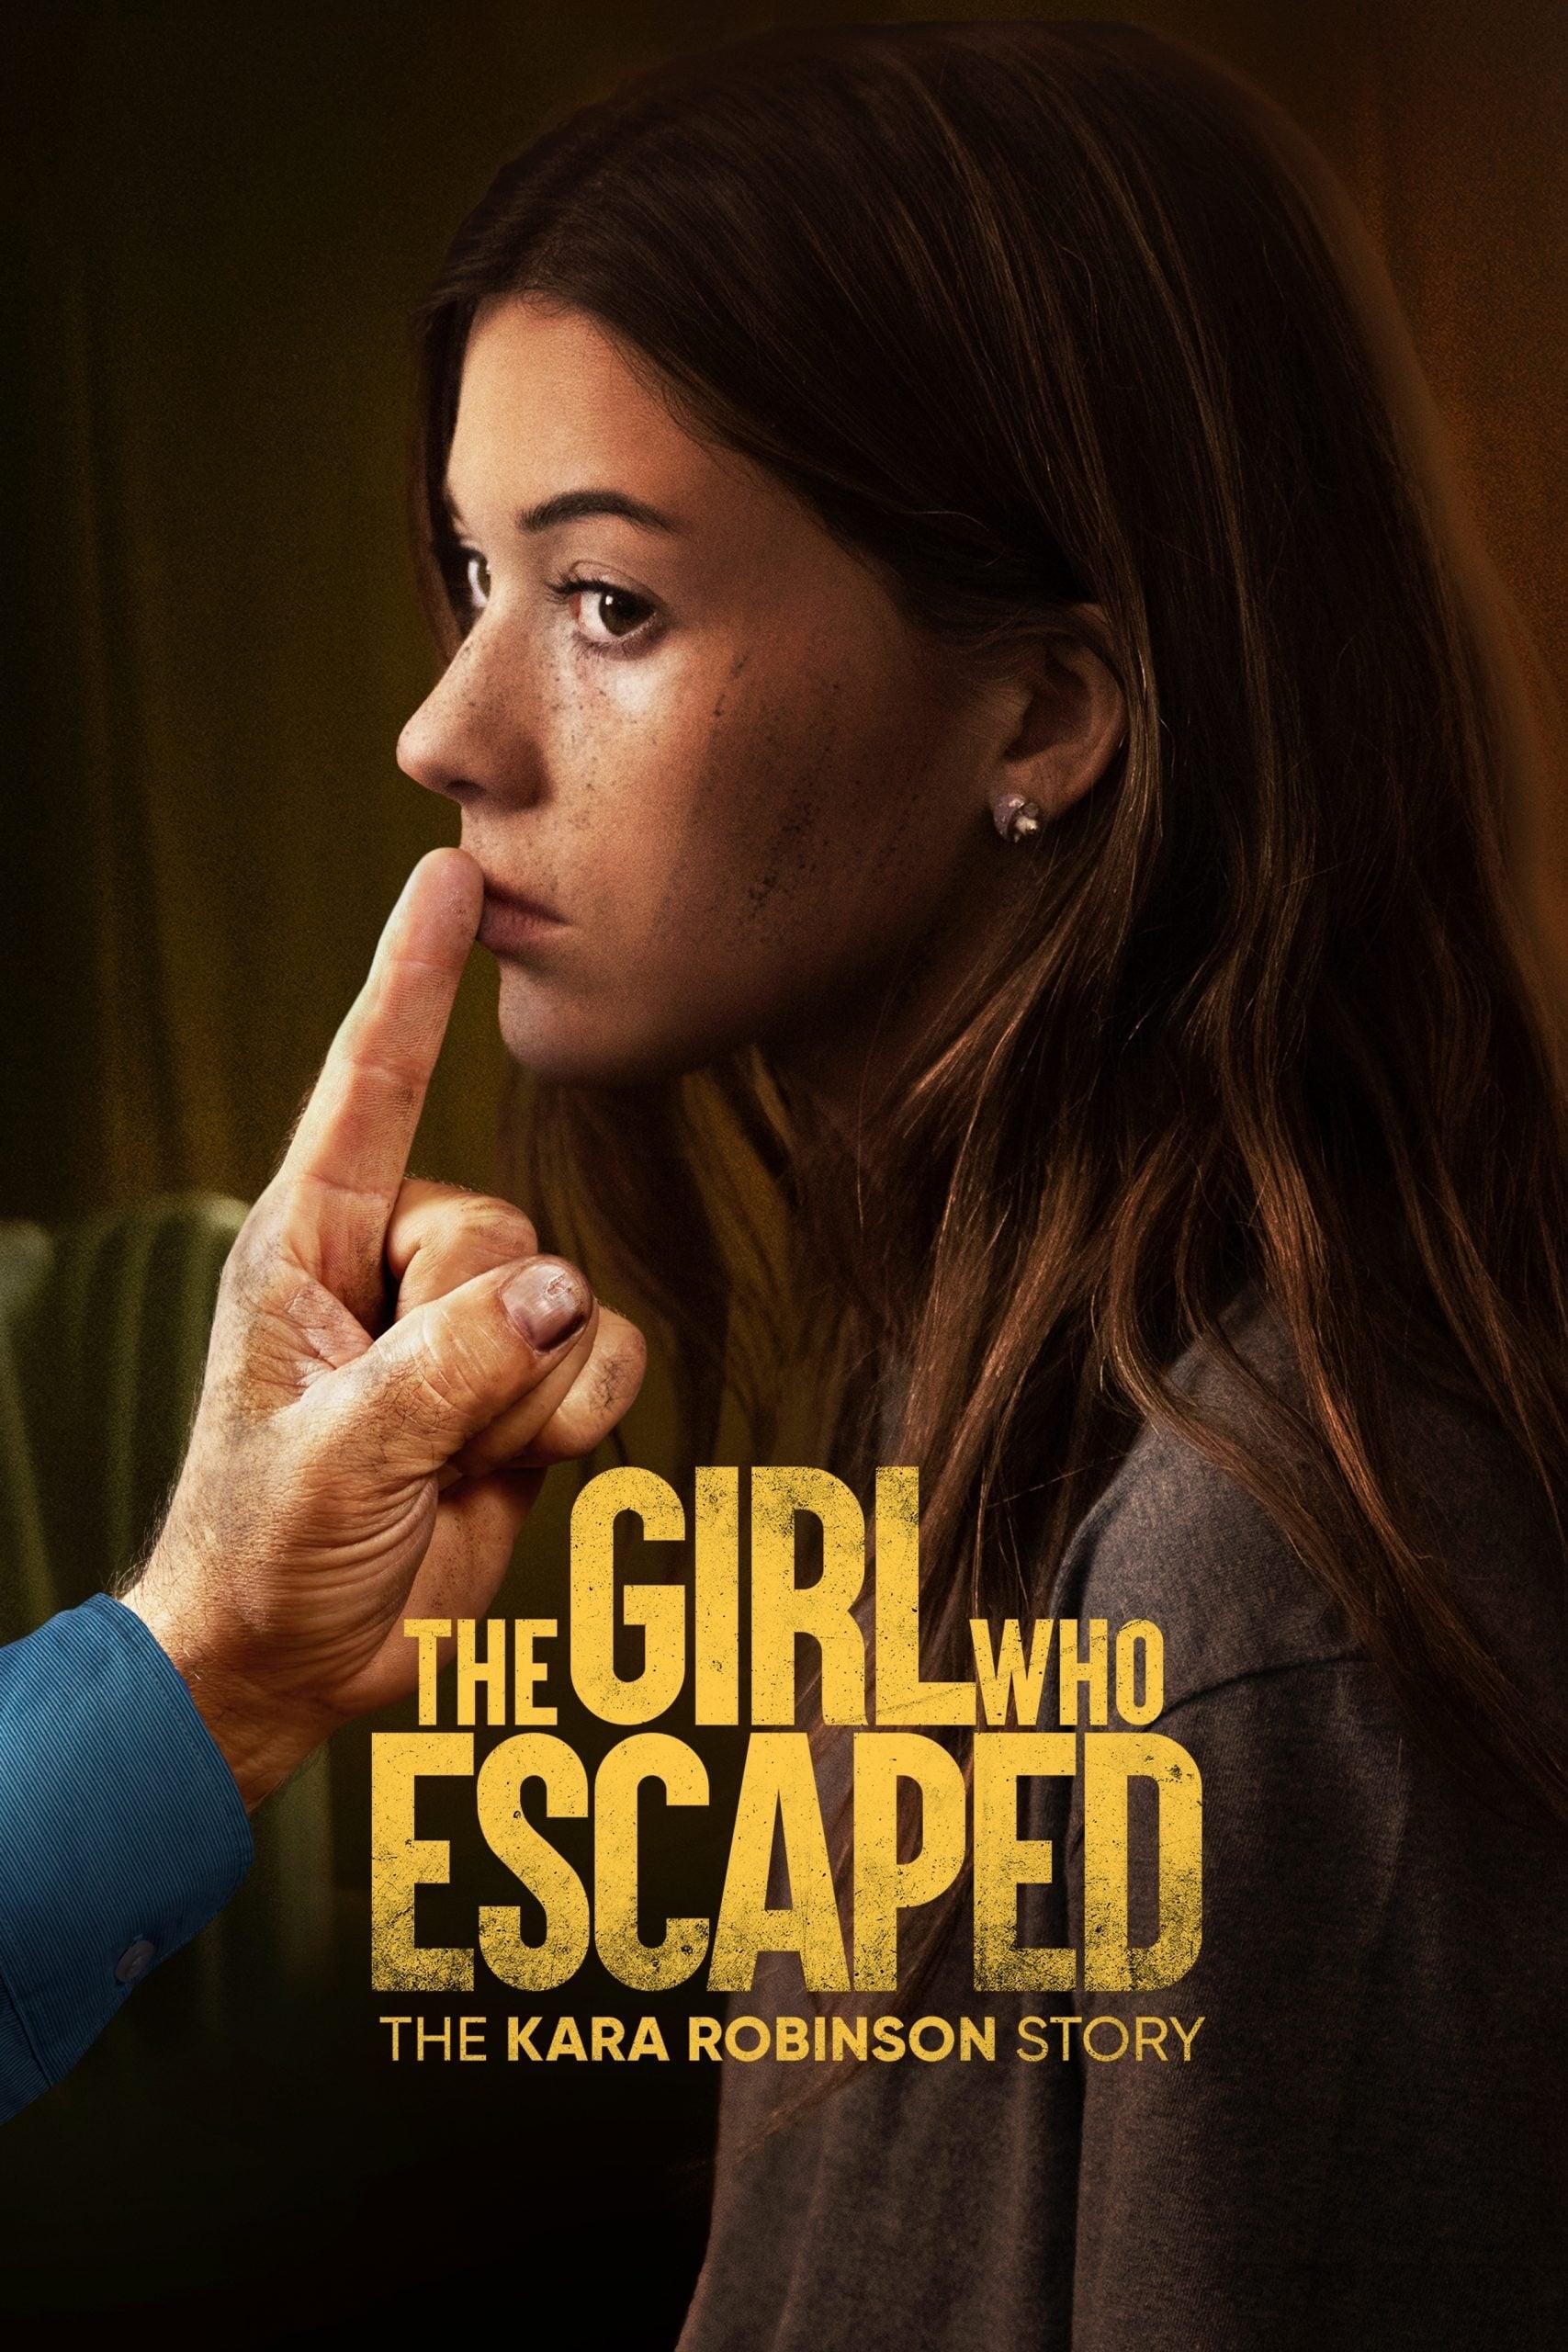 The Girl Who Escaped: The Kara Robinson Story poster